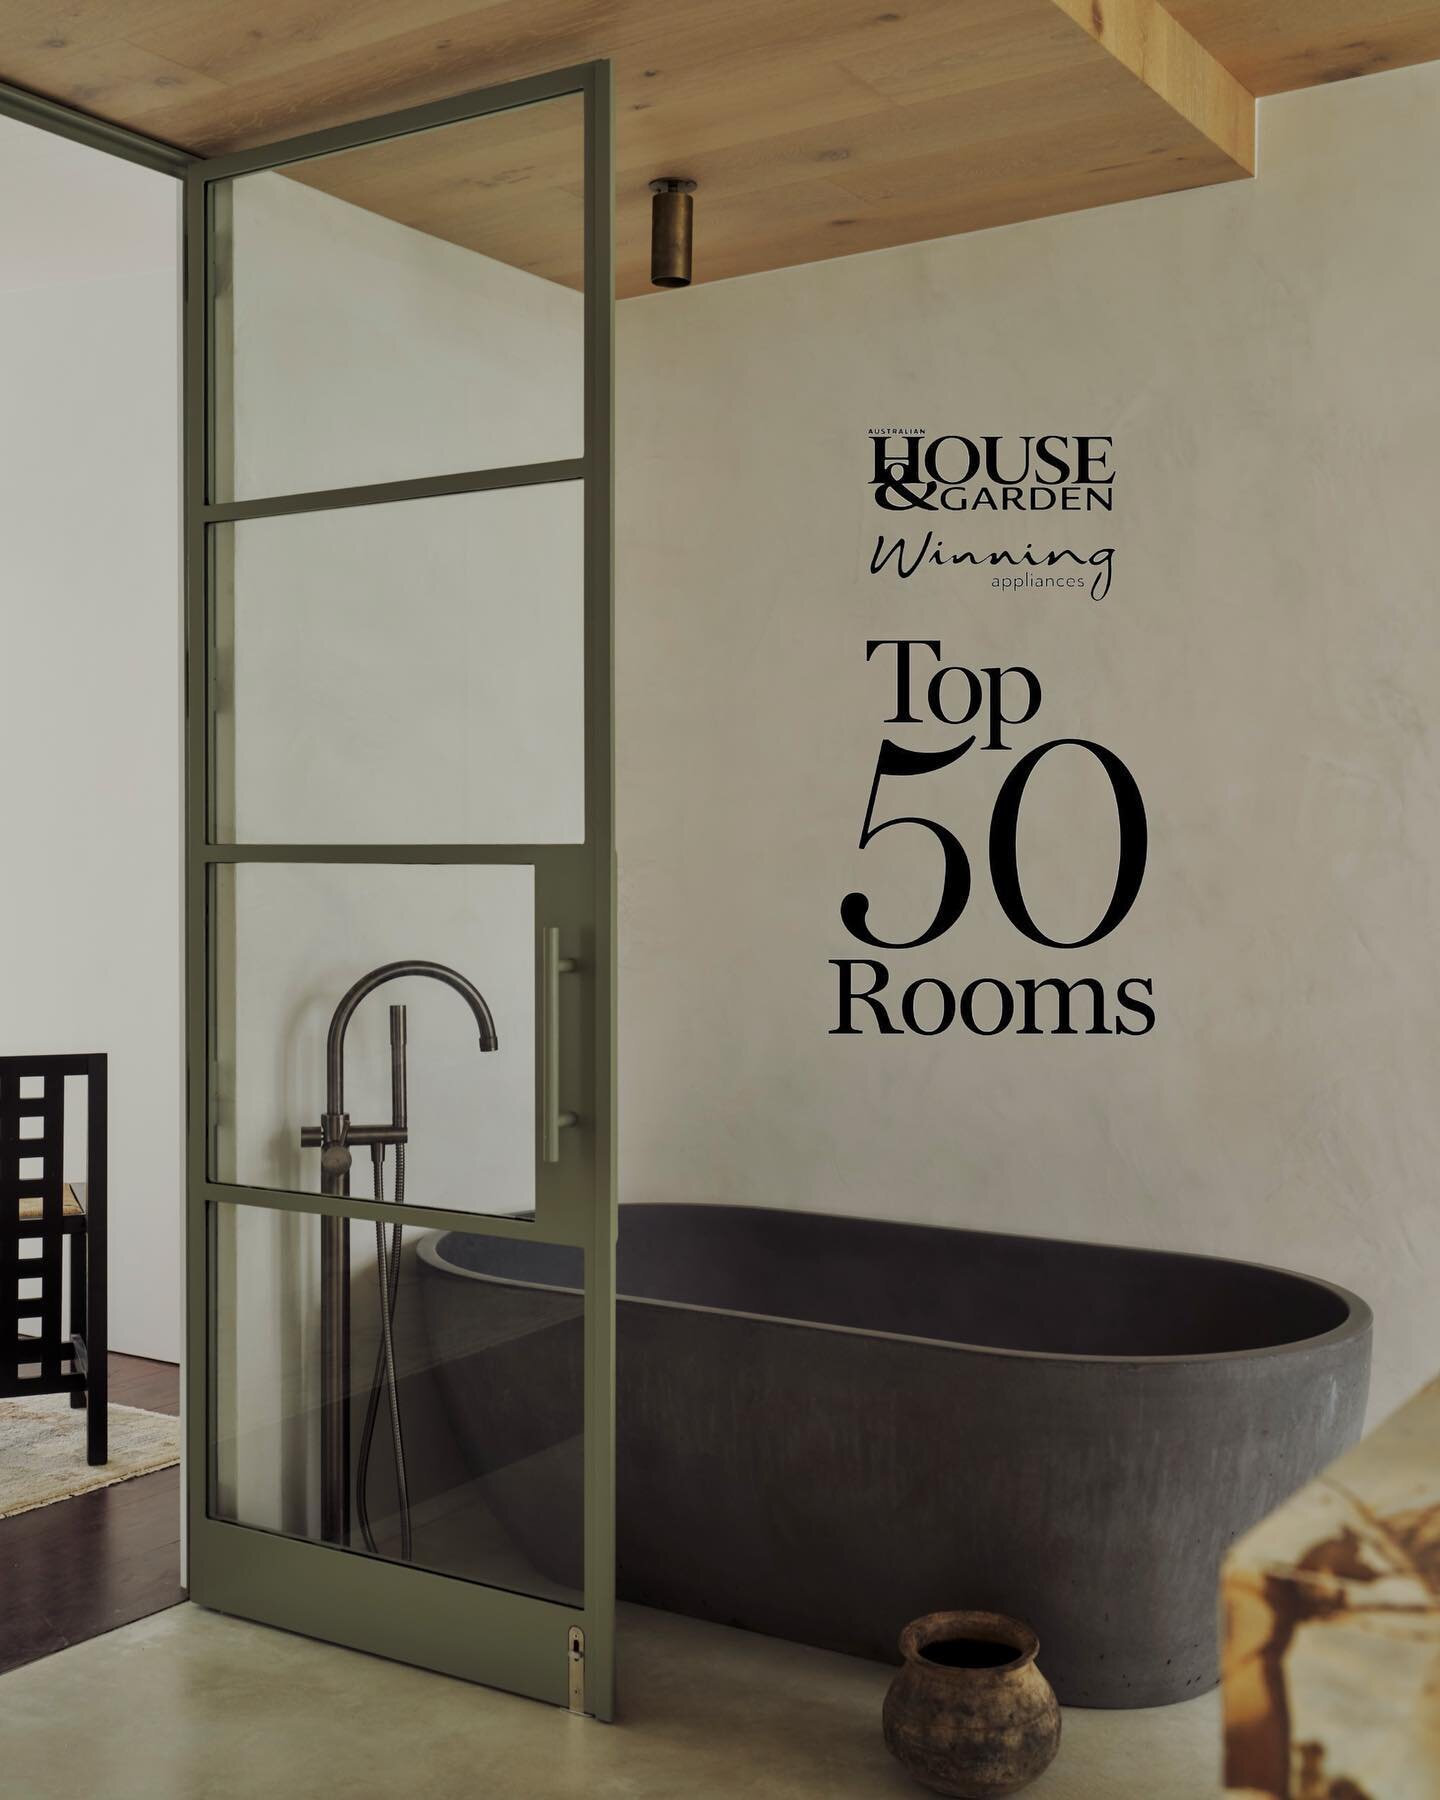 We are so honoured to be announced the Rising Star Winner in House &amp; Gardens Top 50 Rooms, as well as Shortlisted for Best Bathroom.

We are so grateful for our wonderful clients and trusted trades.

Featuring our Fletcher House Project
.
.
.
. 
